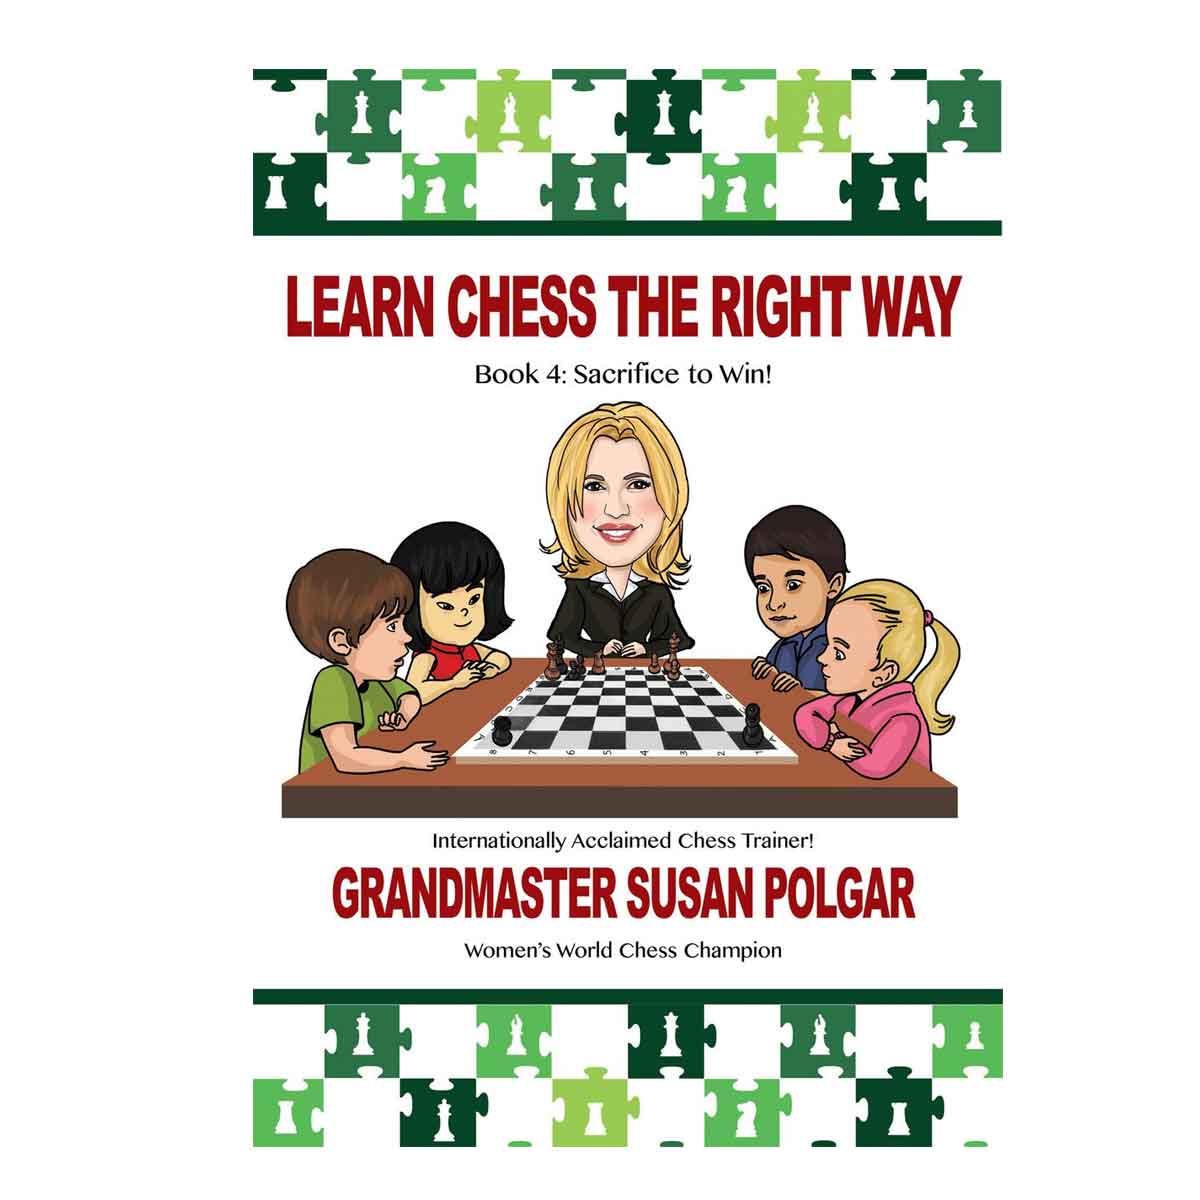 Learn Chess the Right Way: Book 4: Sacrifice to Win!